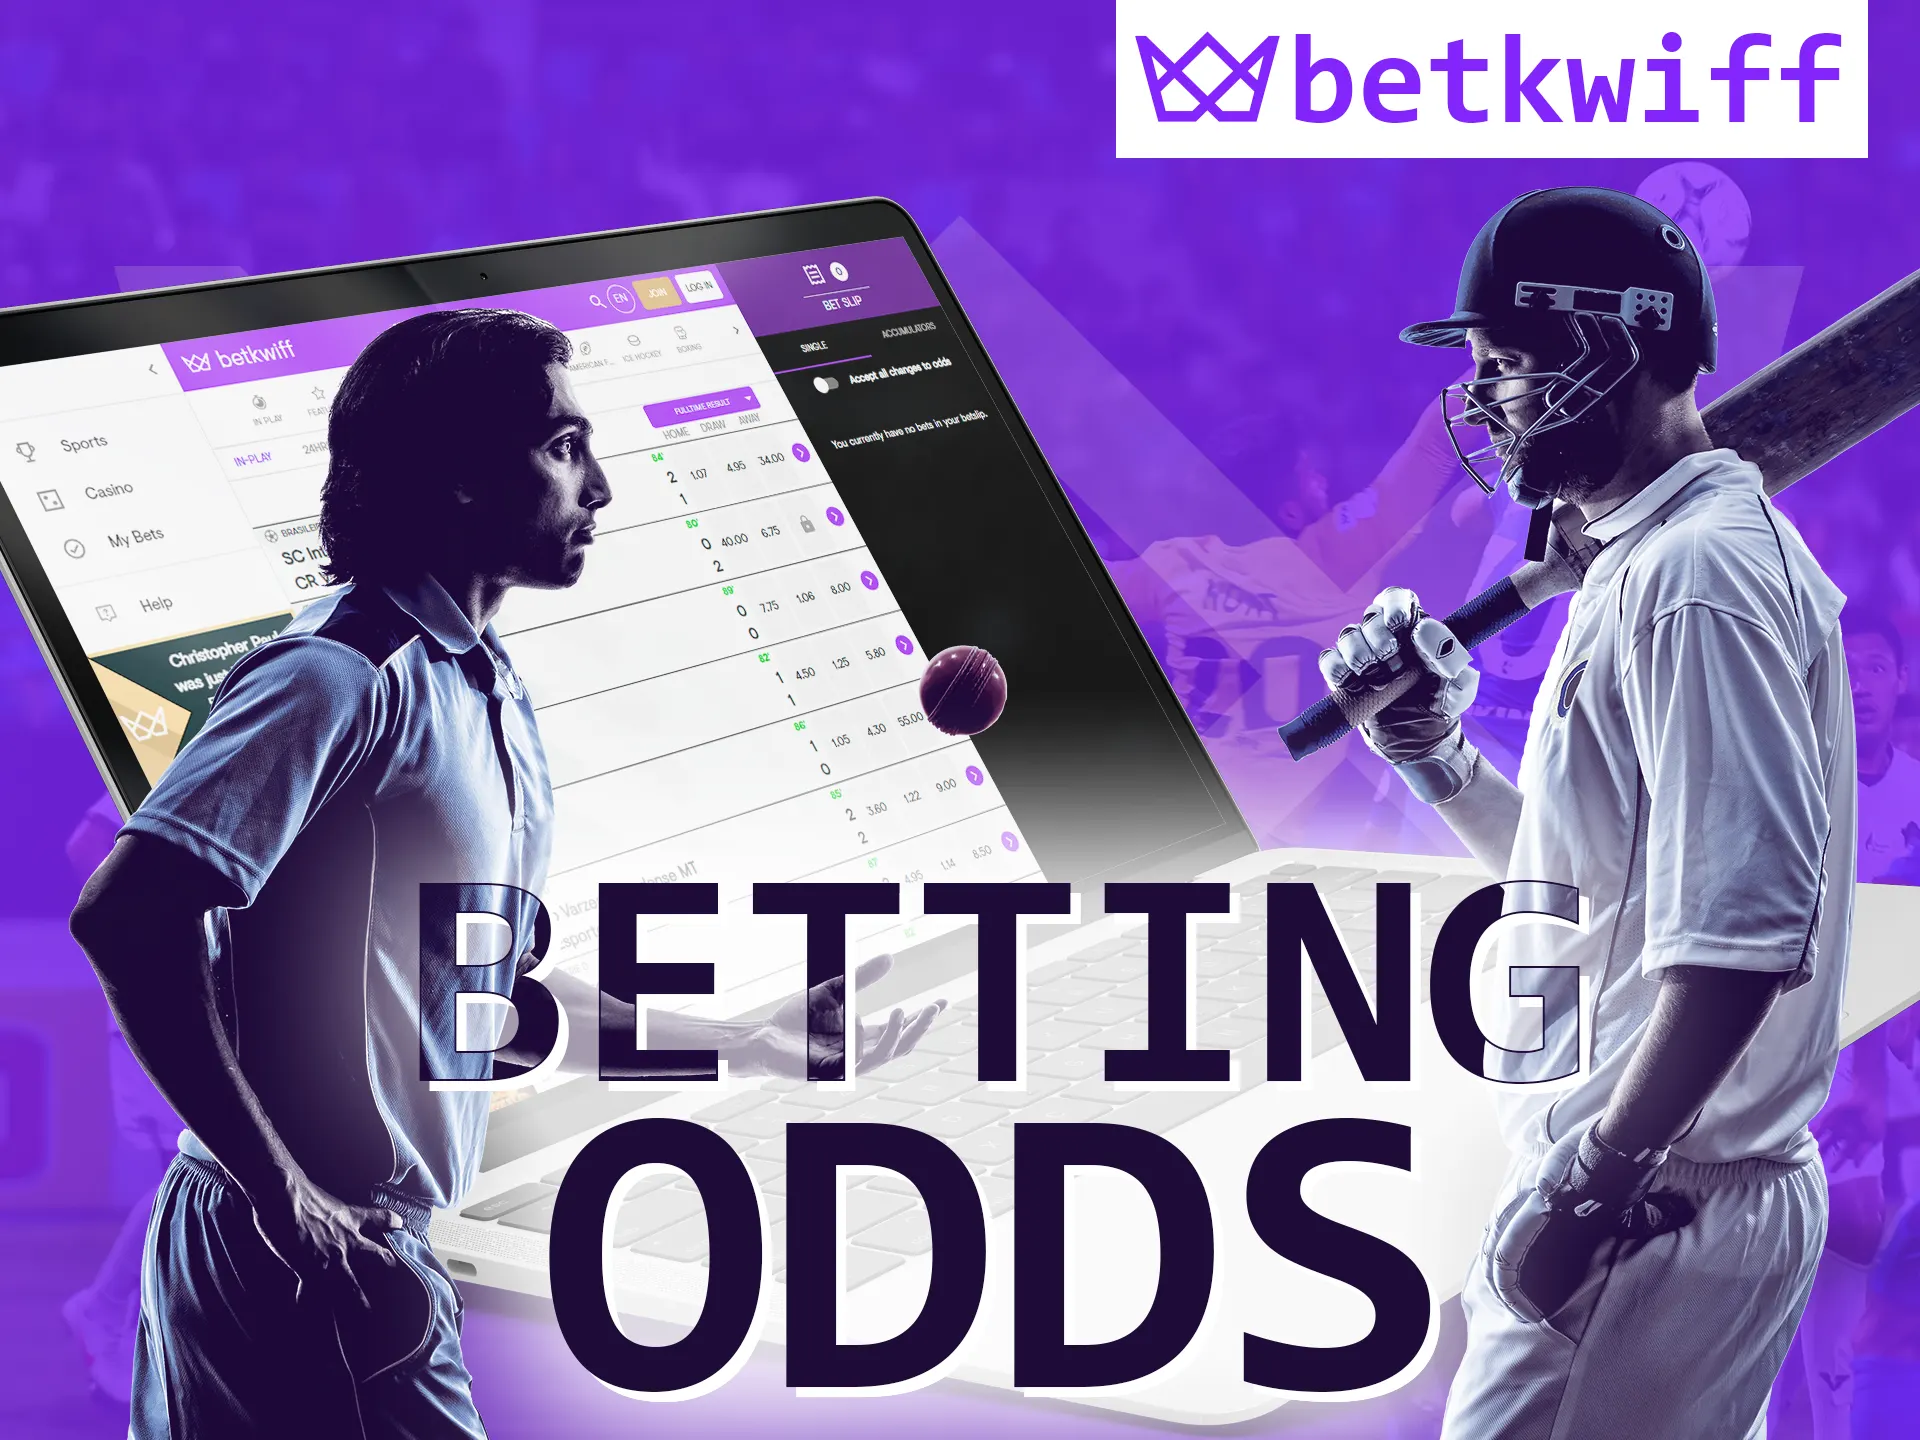 Betkwiff offers special odds for betting.